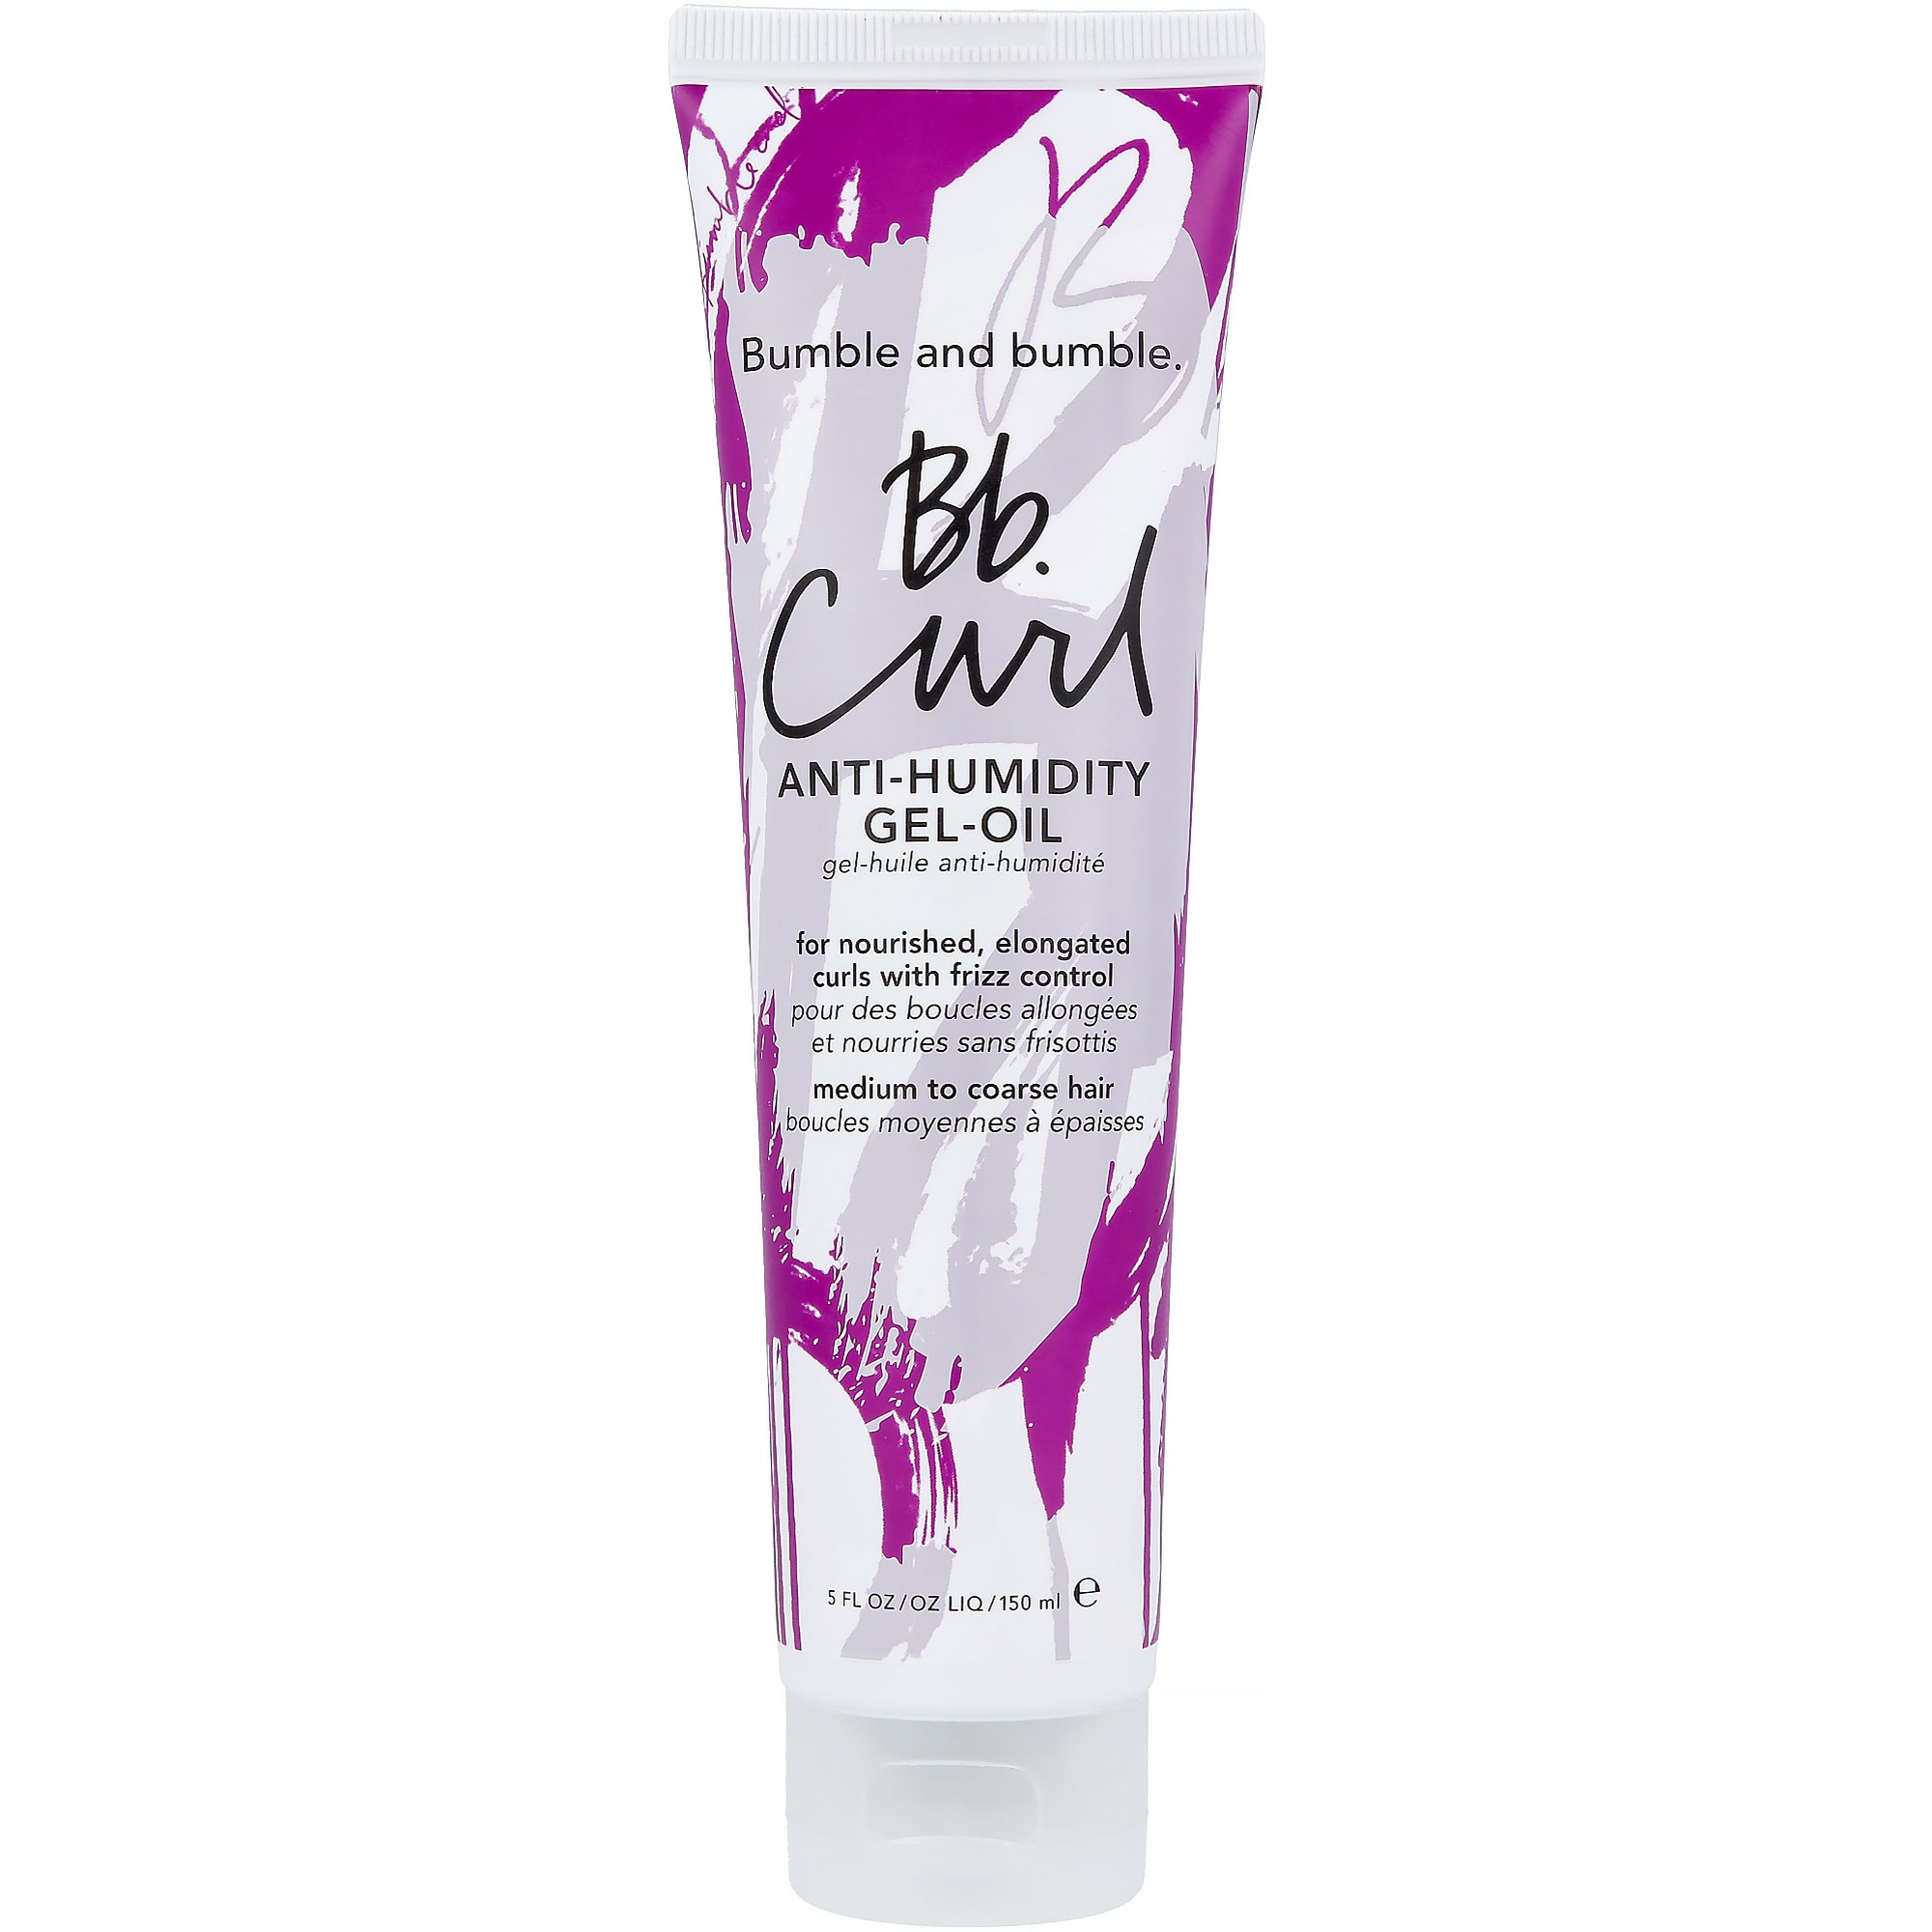 Läs mer om Bumble and bumble Curl Anti Humidity Gel Oil